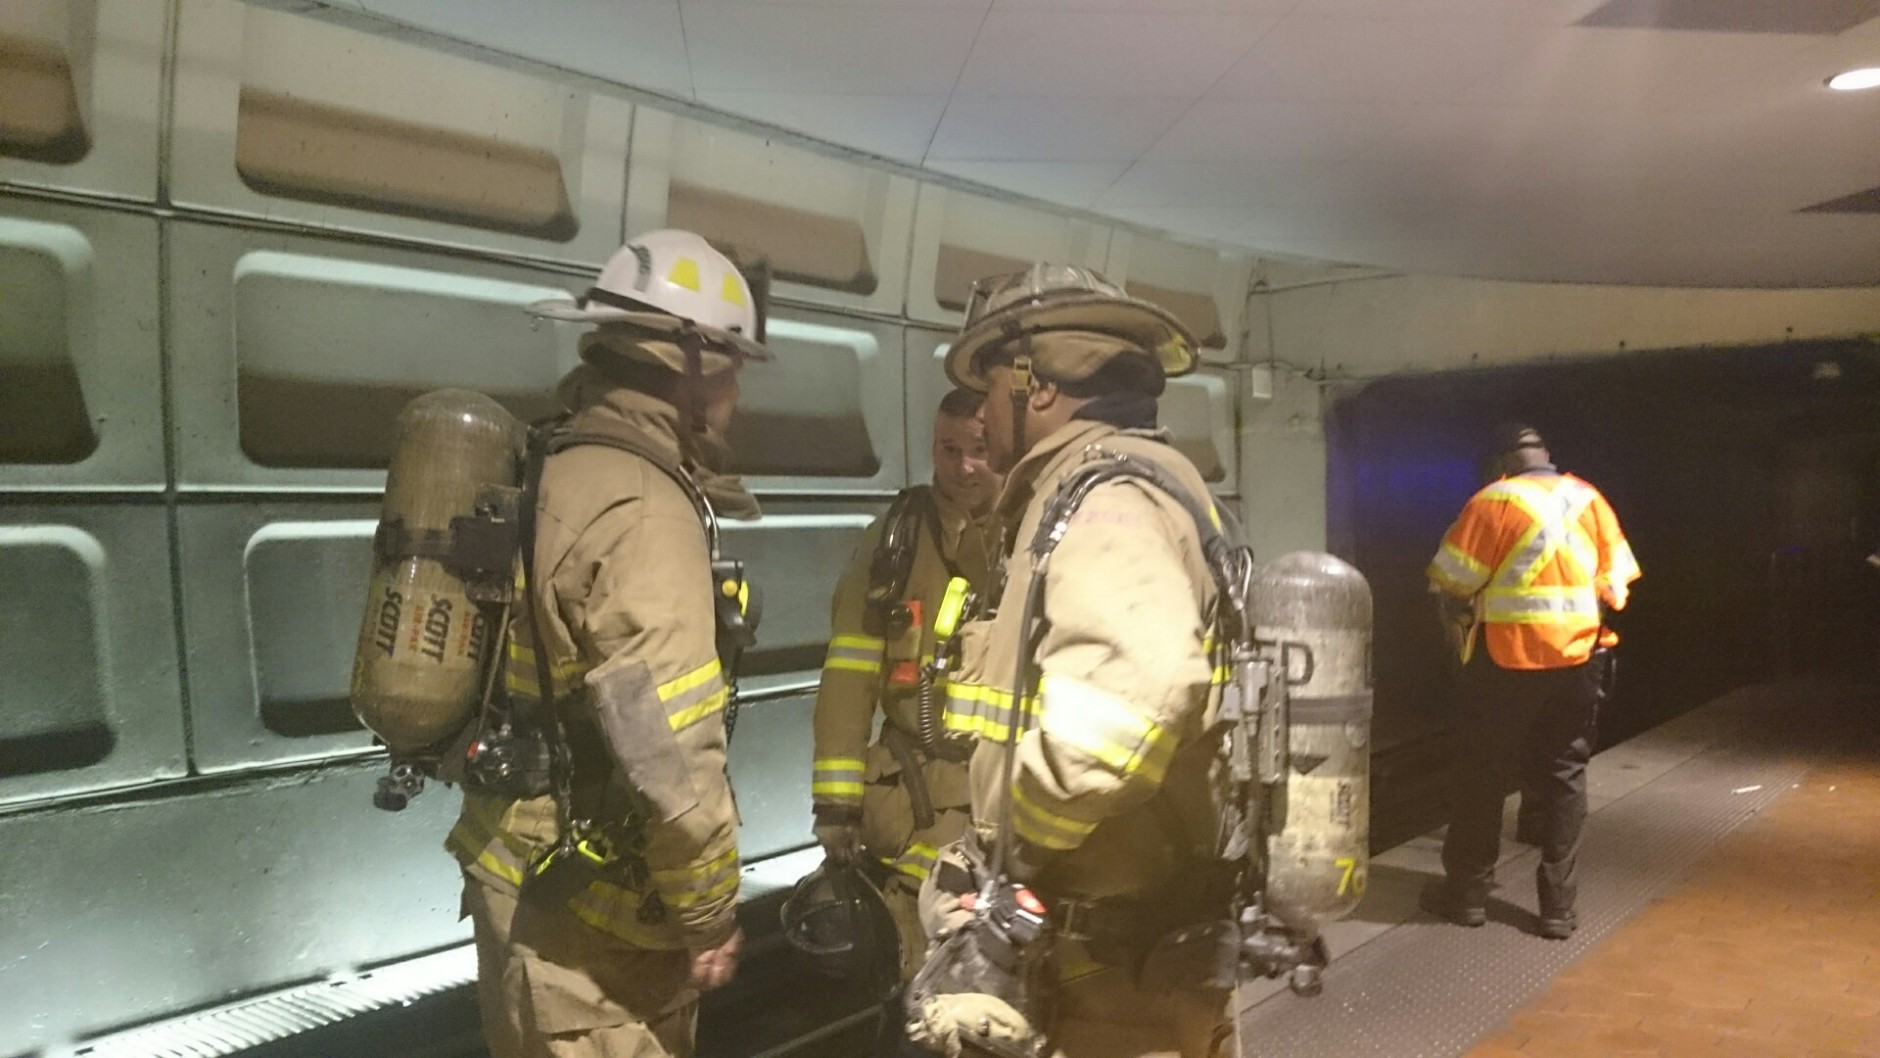 Emergency responders take part in smoke incident drill at Stadium-Armory station in Southeast DC Sunday morning. 